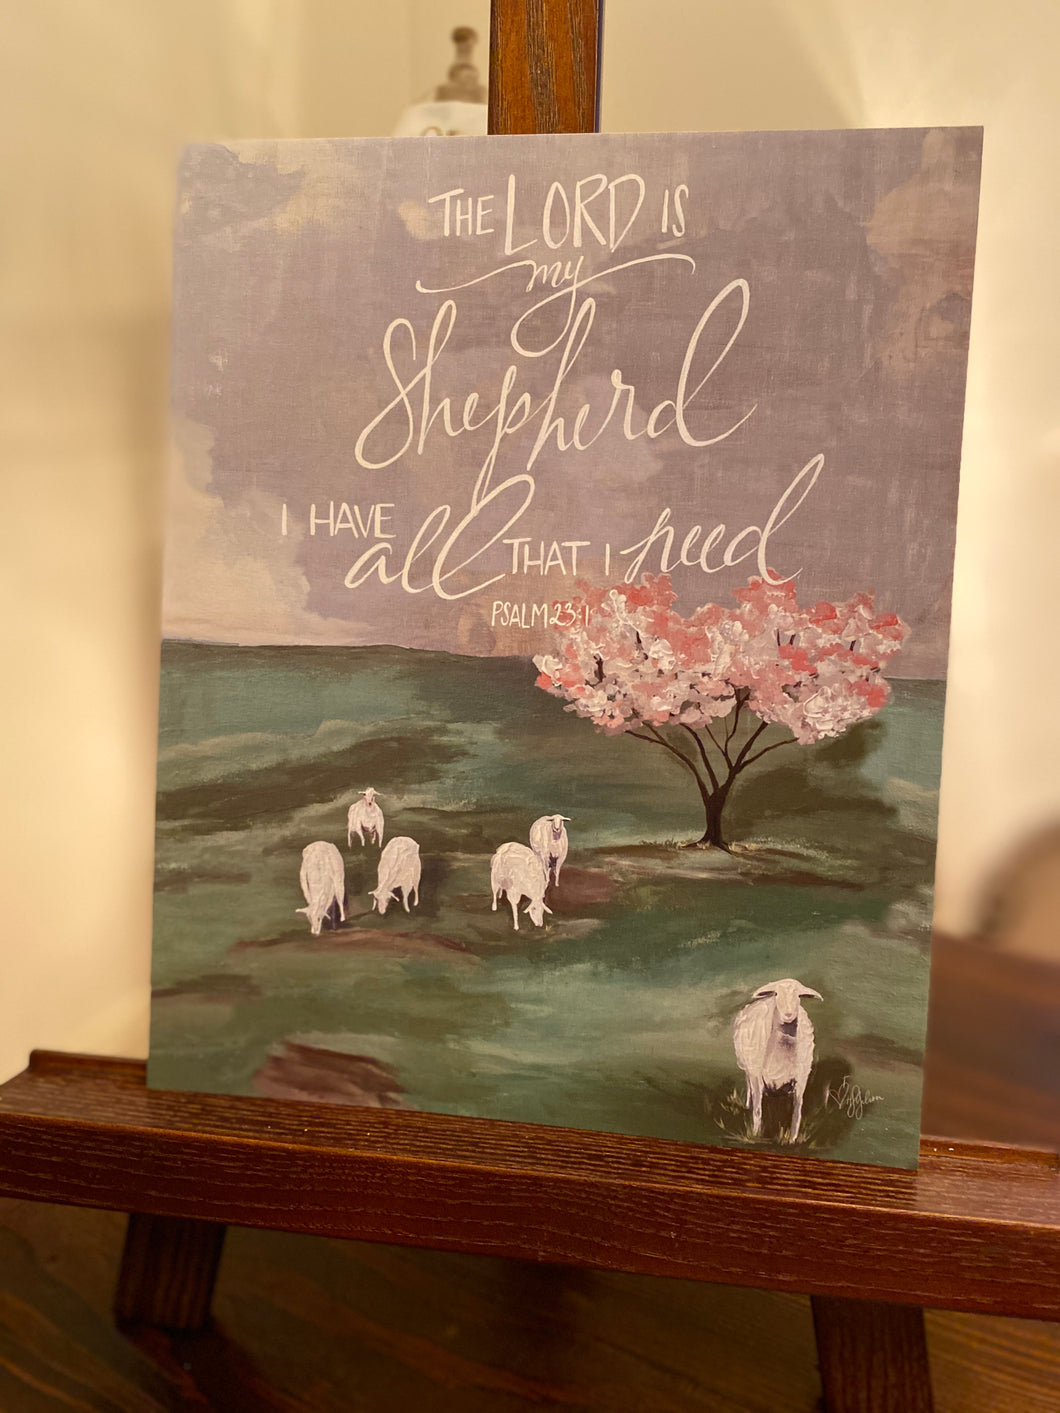 The Lord is my Shepherd (Psalm 23)